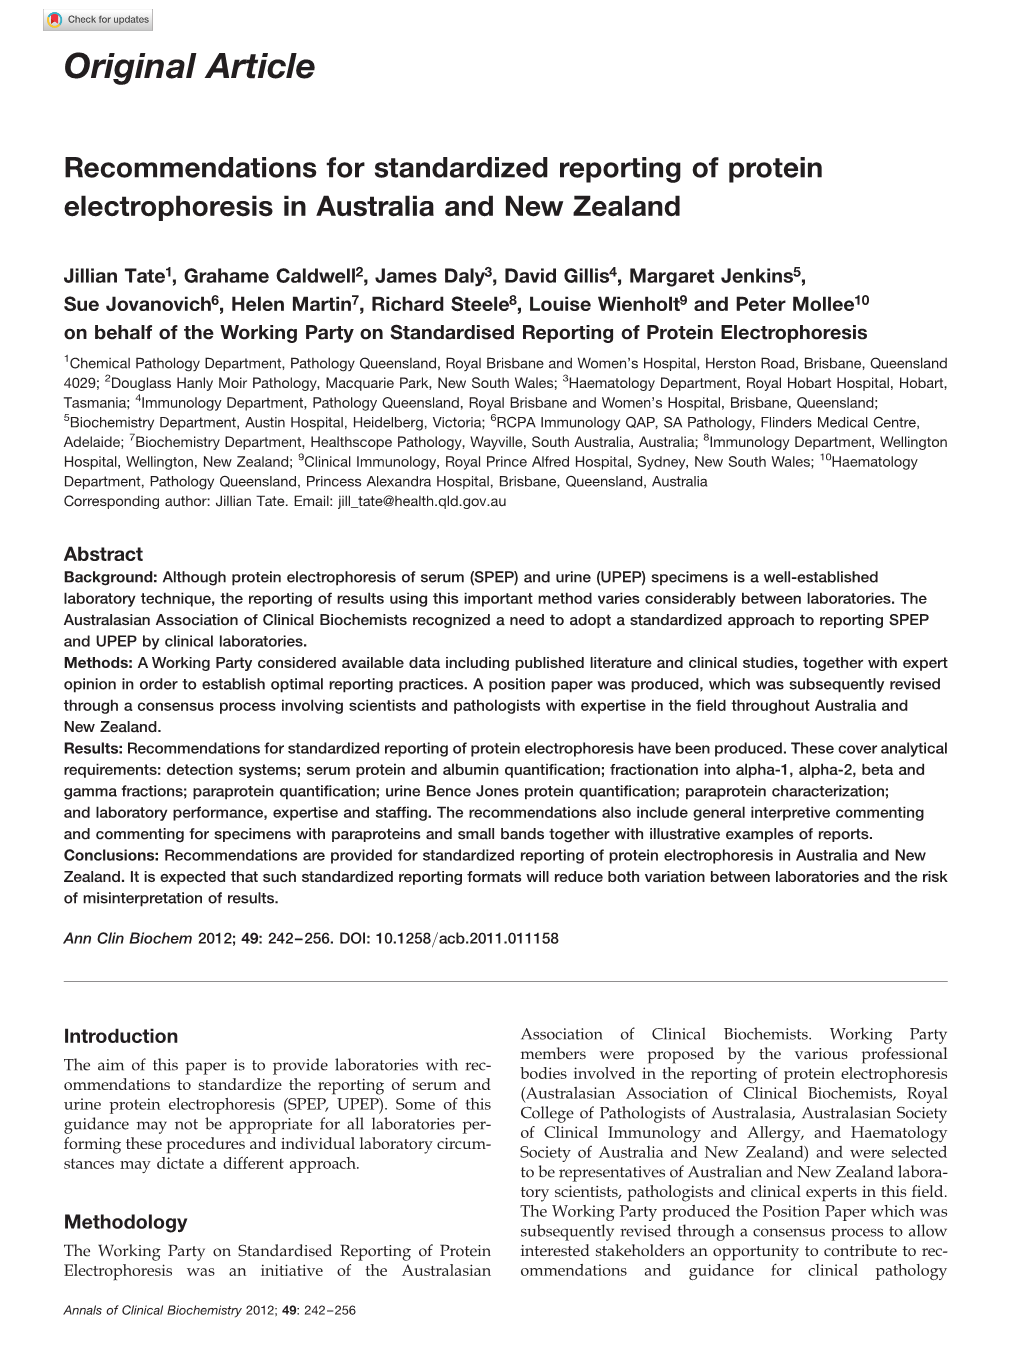 Recommendations for Standardized Reporting of Protein Electrophoresis in Australia and New Zealand